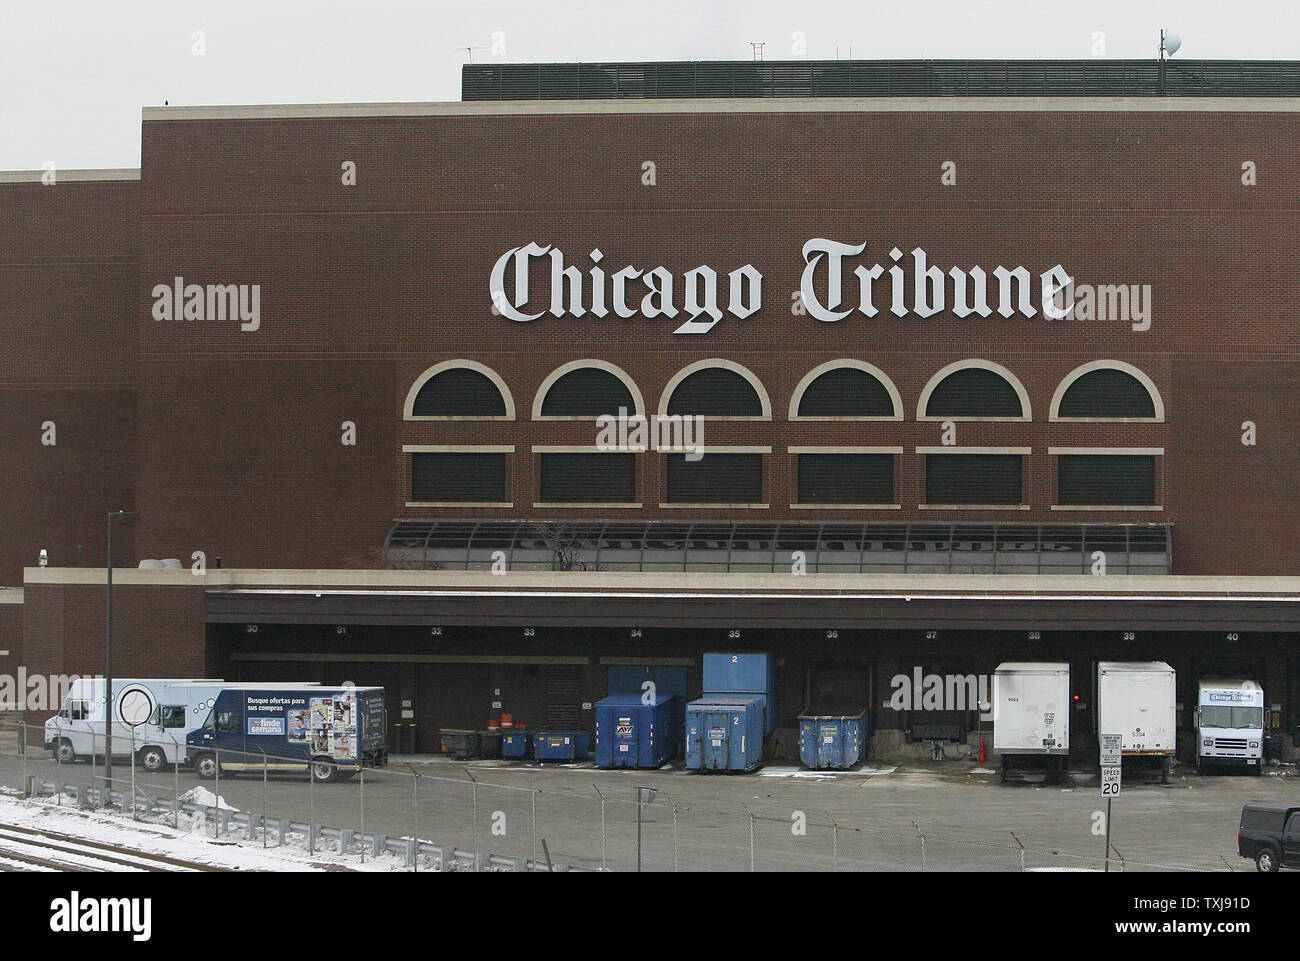 Trucks sit in a loading dock at the Chicago Tribune's printing plant on December 8, 2008 in Chicago. The Tribune Company, which owns the Chicago Cubs baseball franchise, as well as the Los Angeles Times, Chicago Tribune, The Sun of Baltimore, The Hartford (Conn.) Courant, six other daily newspapers and 23 television stations, filed for bankruptcy protection Monday in a Delaware court. (UPI Photo/Brian Kersey) Stock Photo